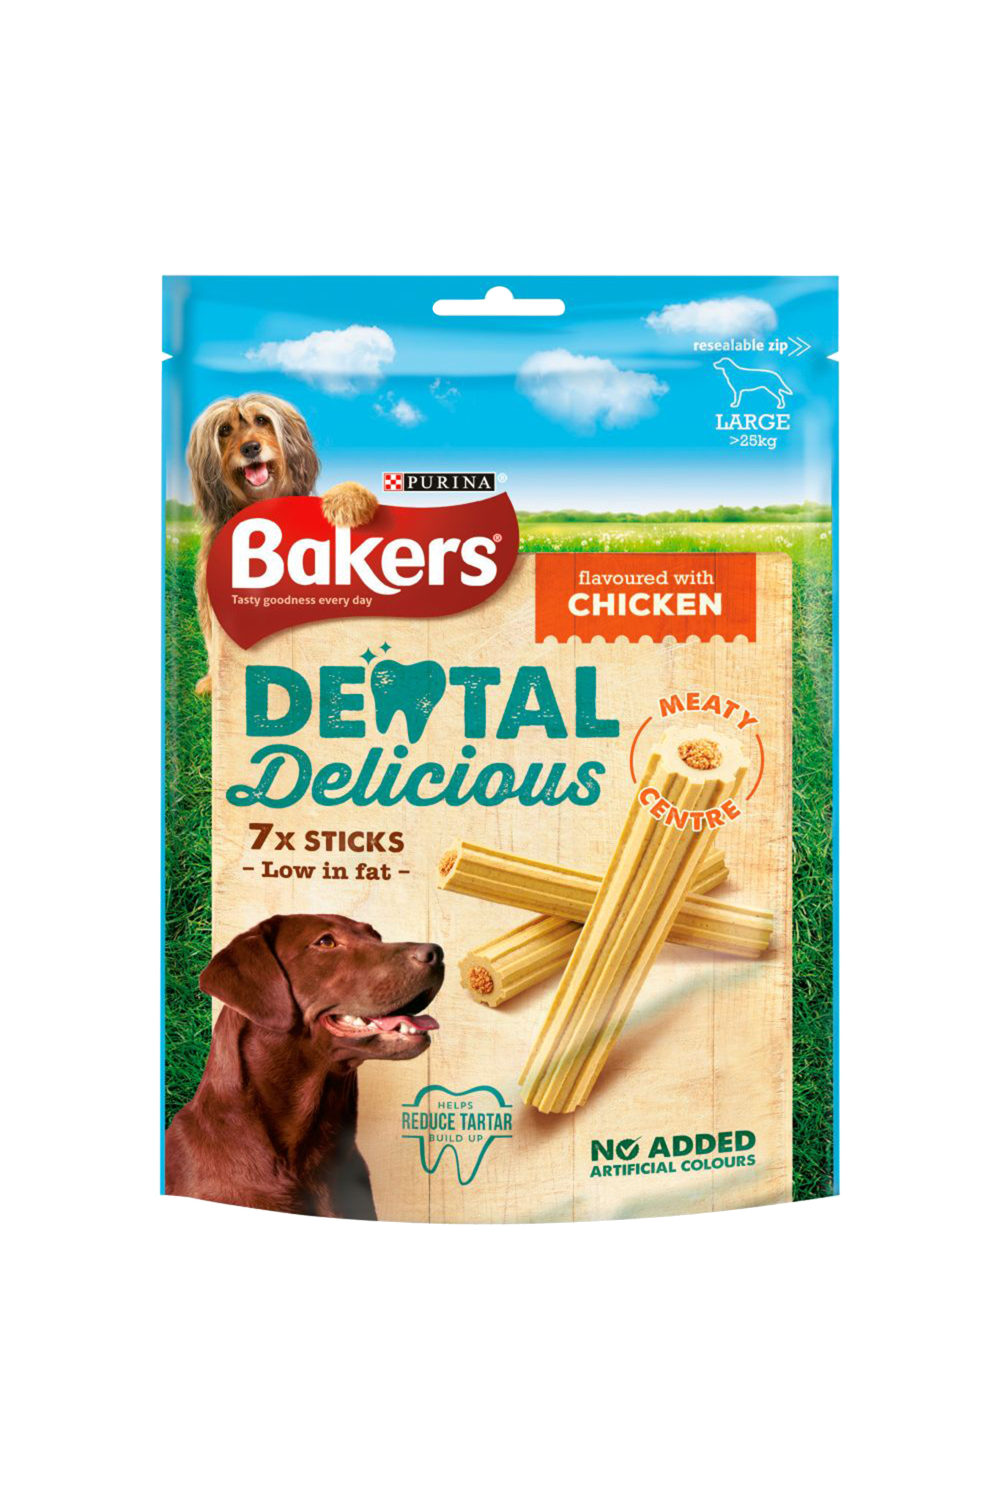 Bakers Dental Delicious Chicken Sticks (May Vary) (9.5oz)